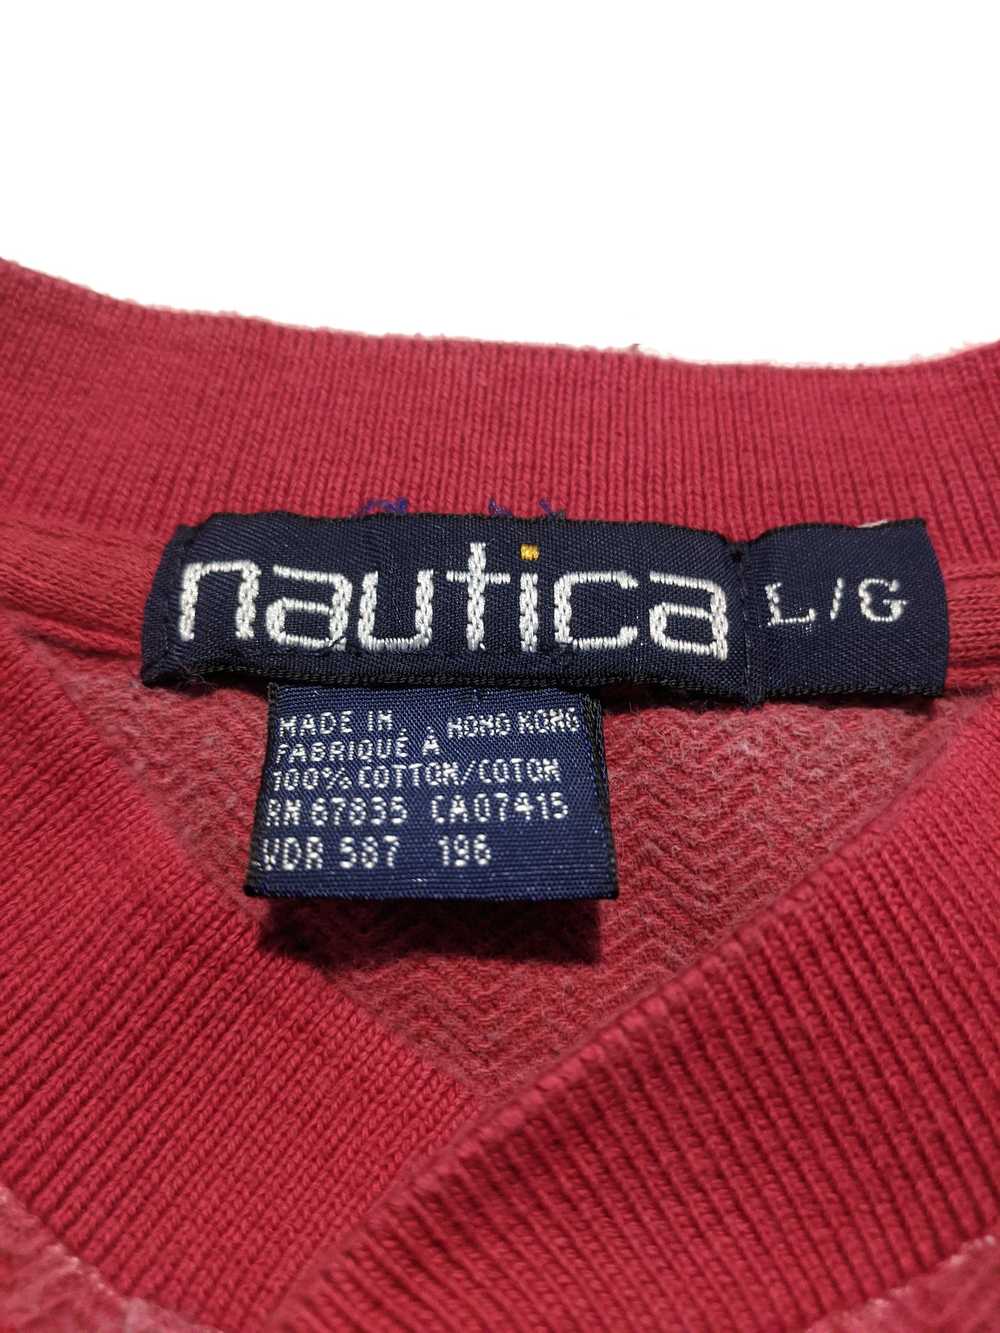 Nautica Large Red Vintage 1990s Striped Embroider… - image 3